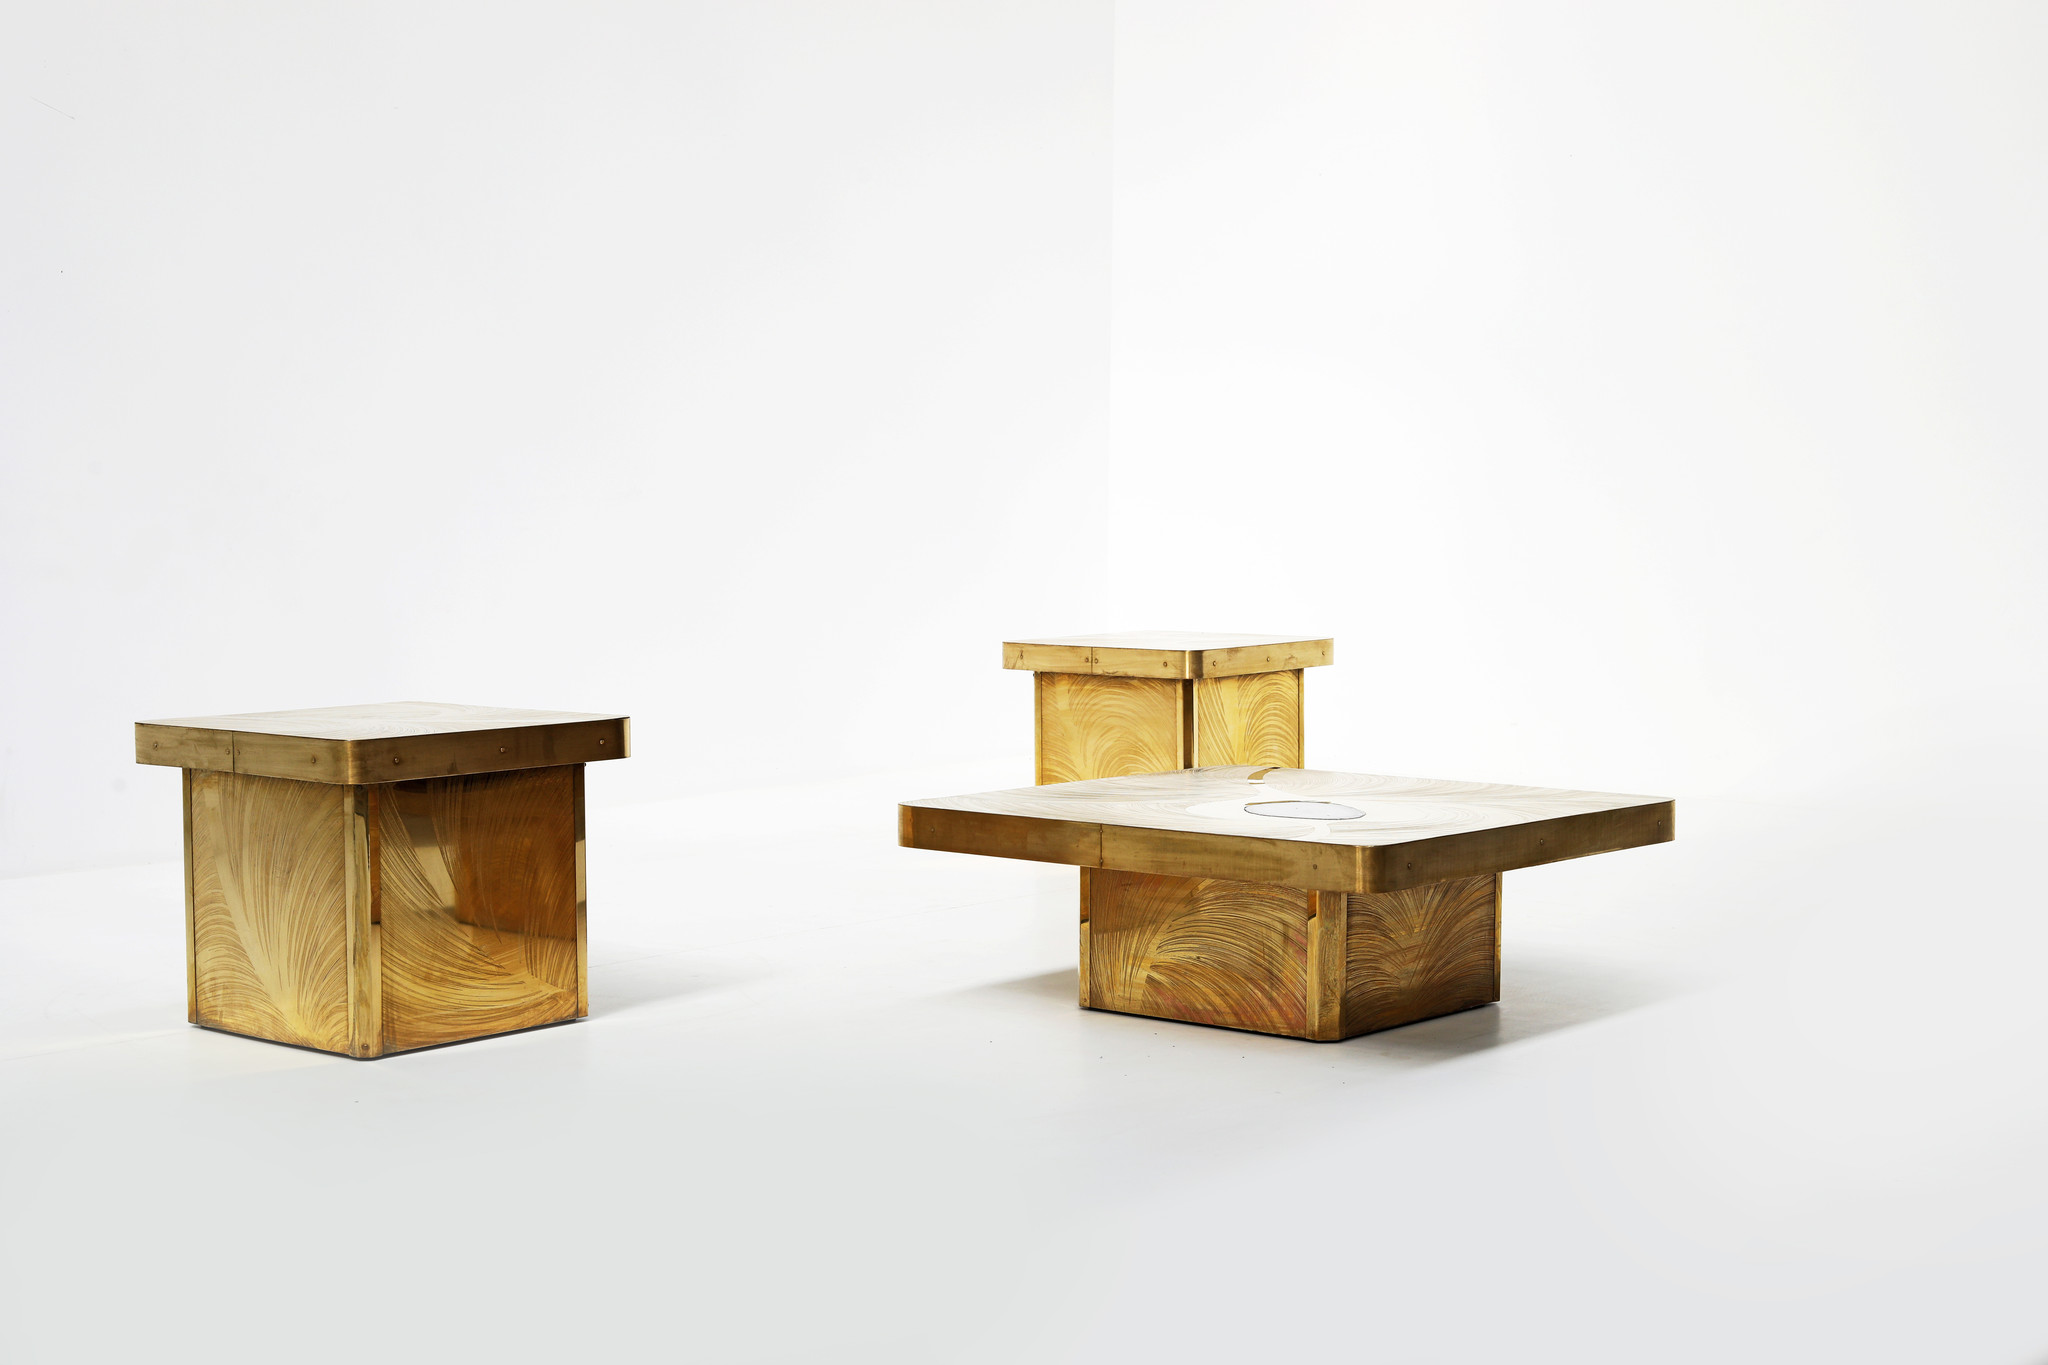 Marc d'Haenens exceptional set of coffee tables from the 1970s